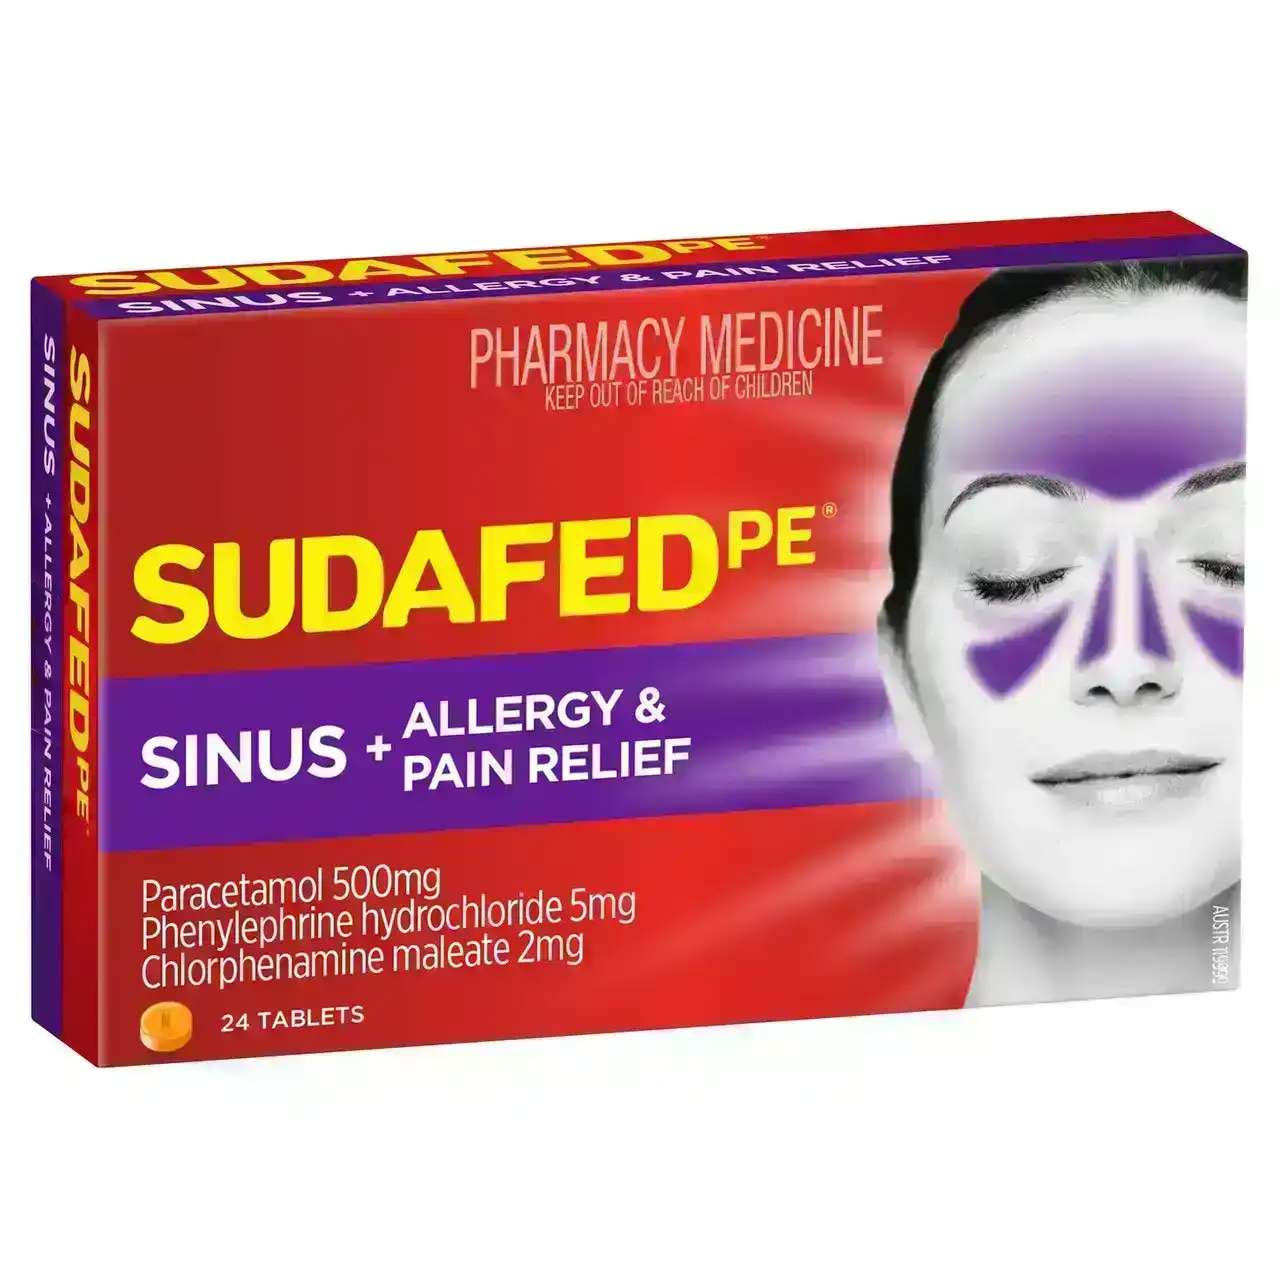 SUDAFED PE Sinus + Allergy &amp; Pain Relief Tablets 24 Pack